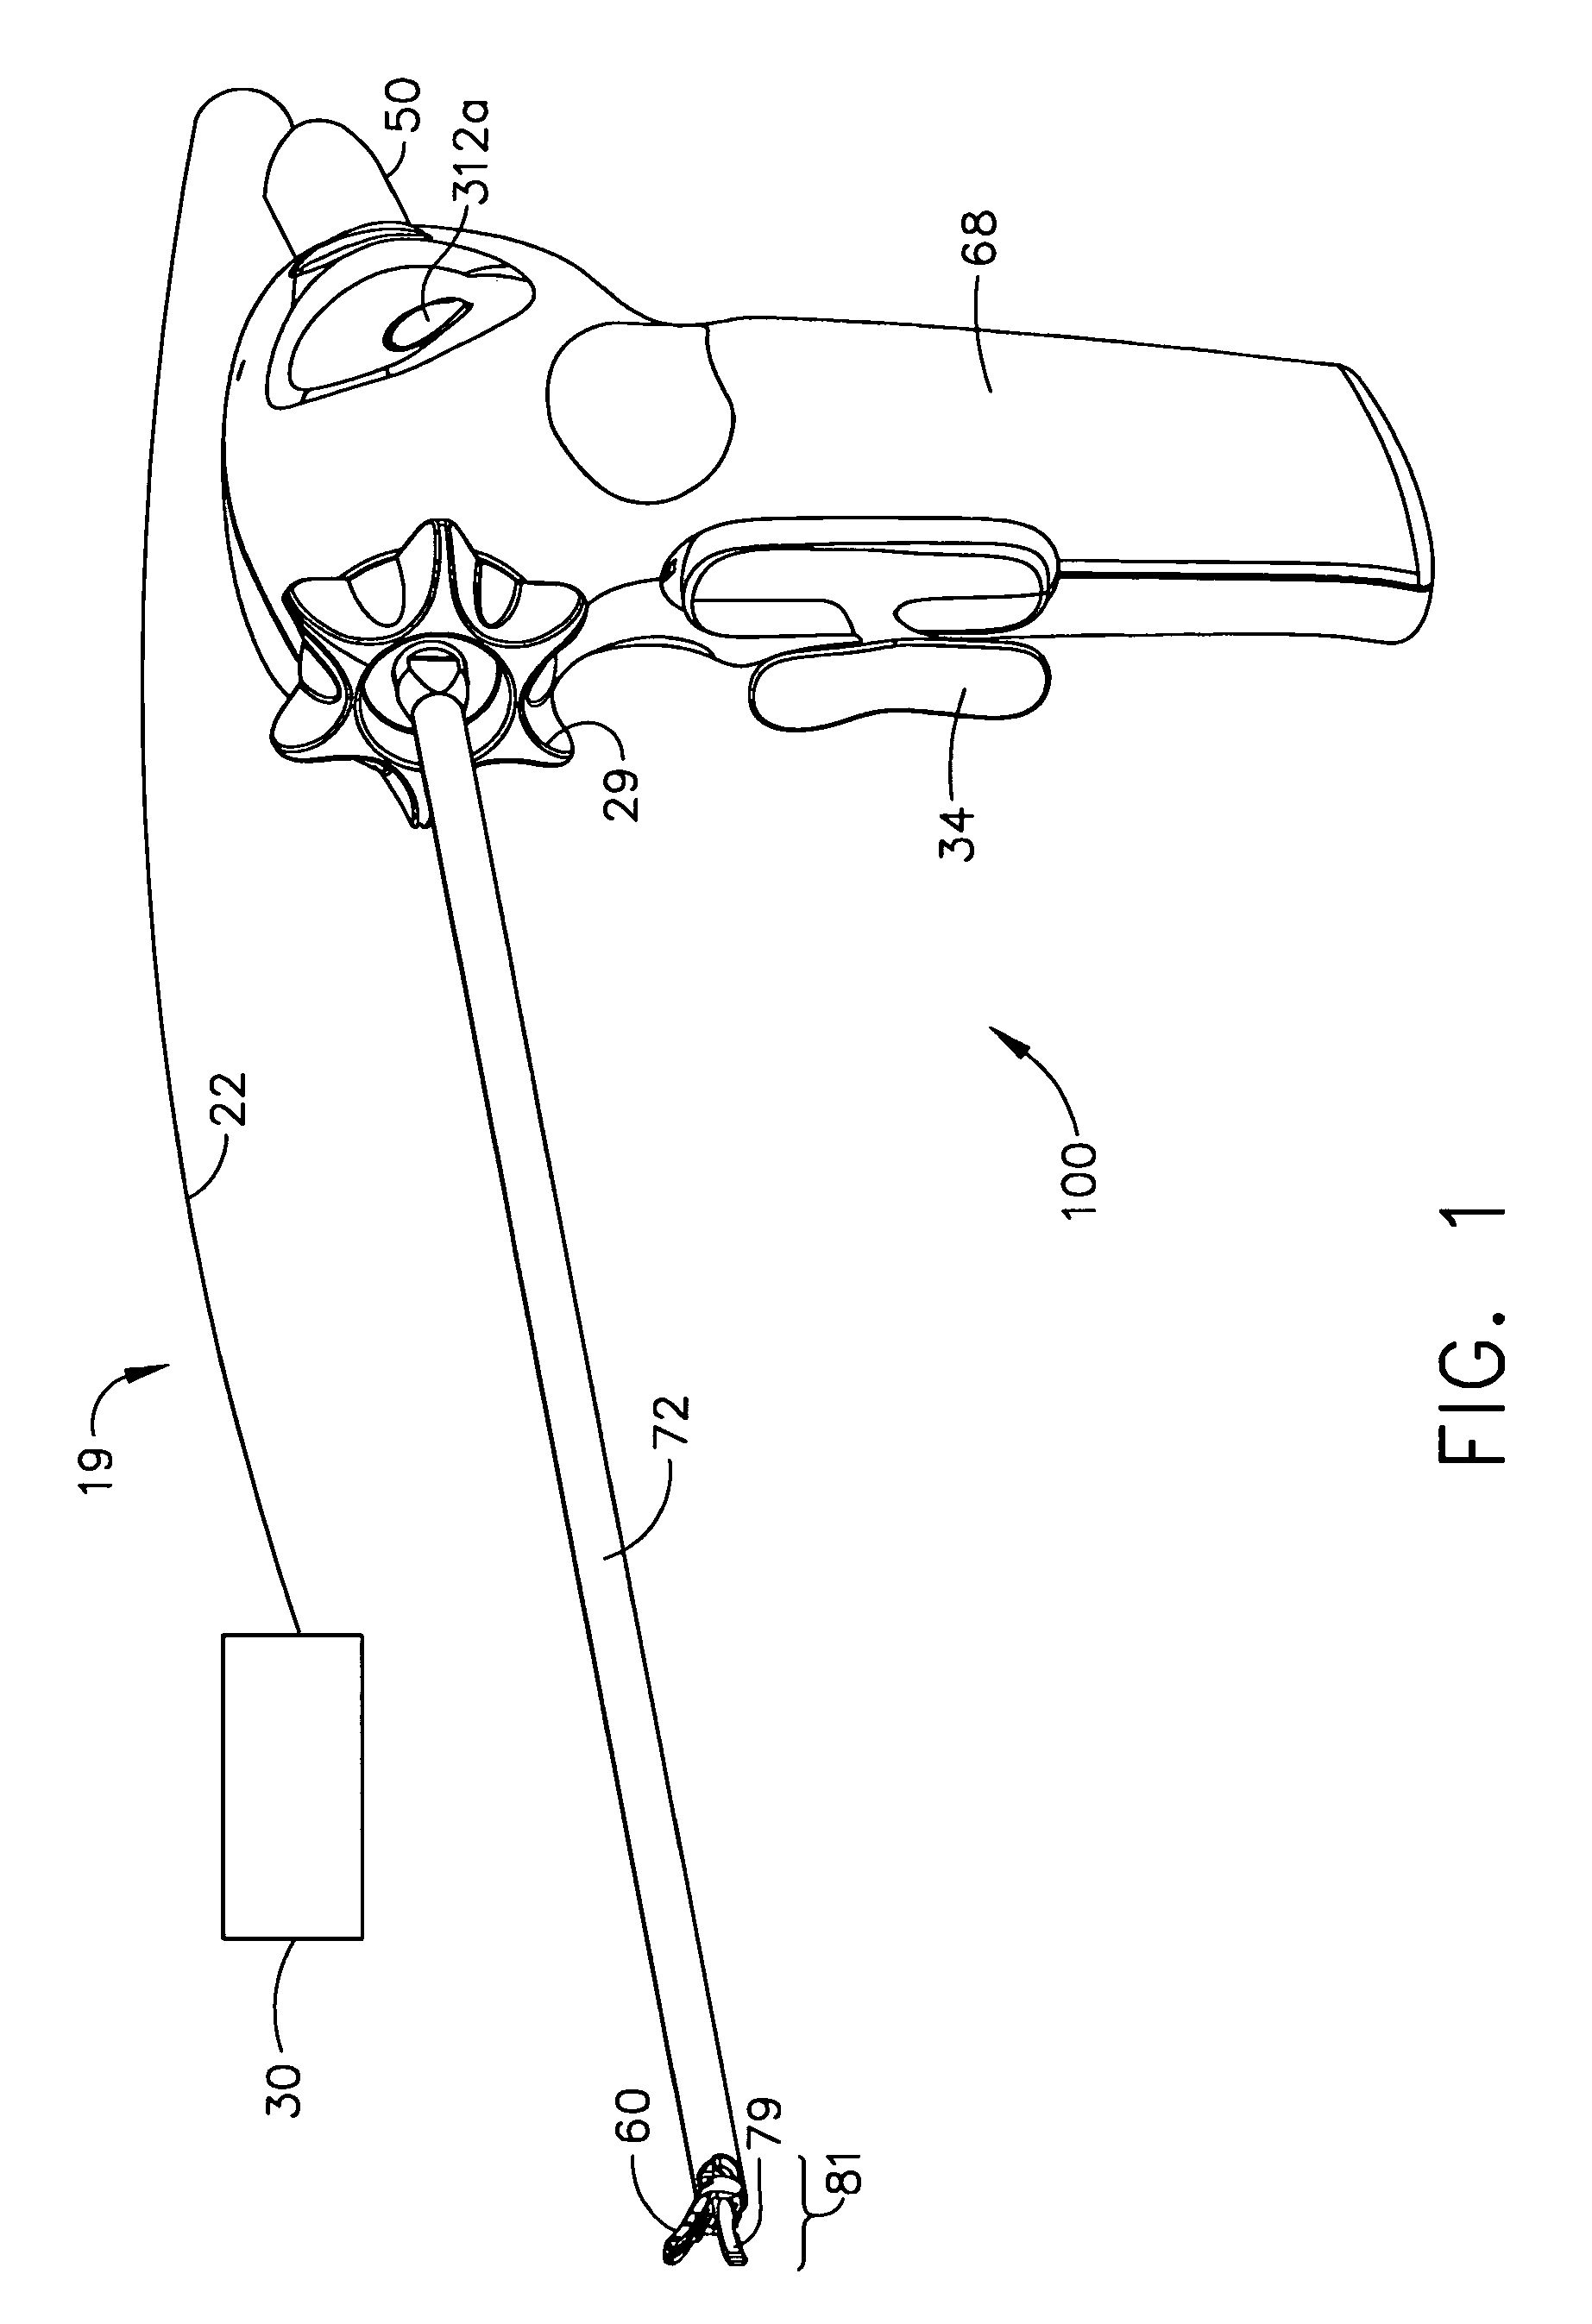 Combination tissue pad for use with an ultrasonic surgical instrument